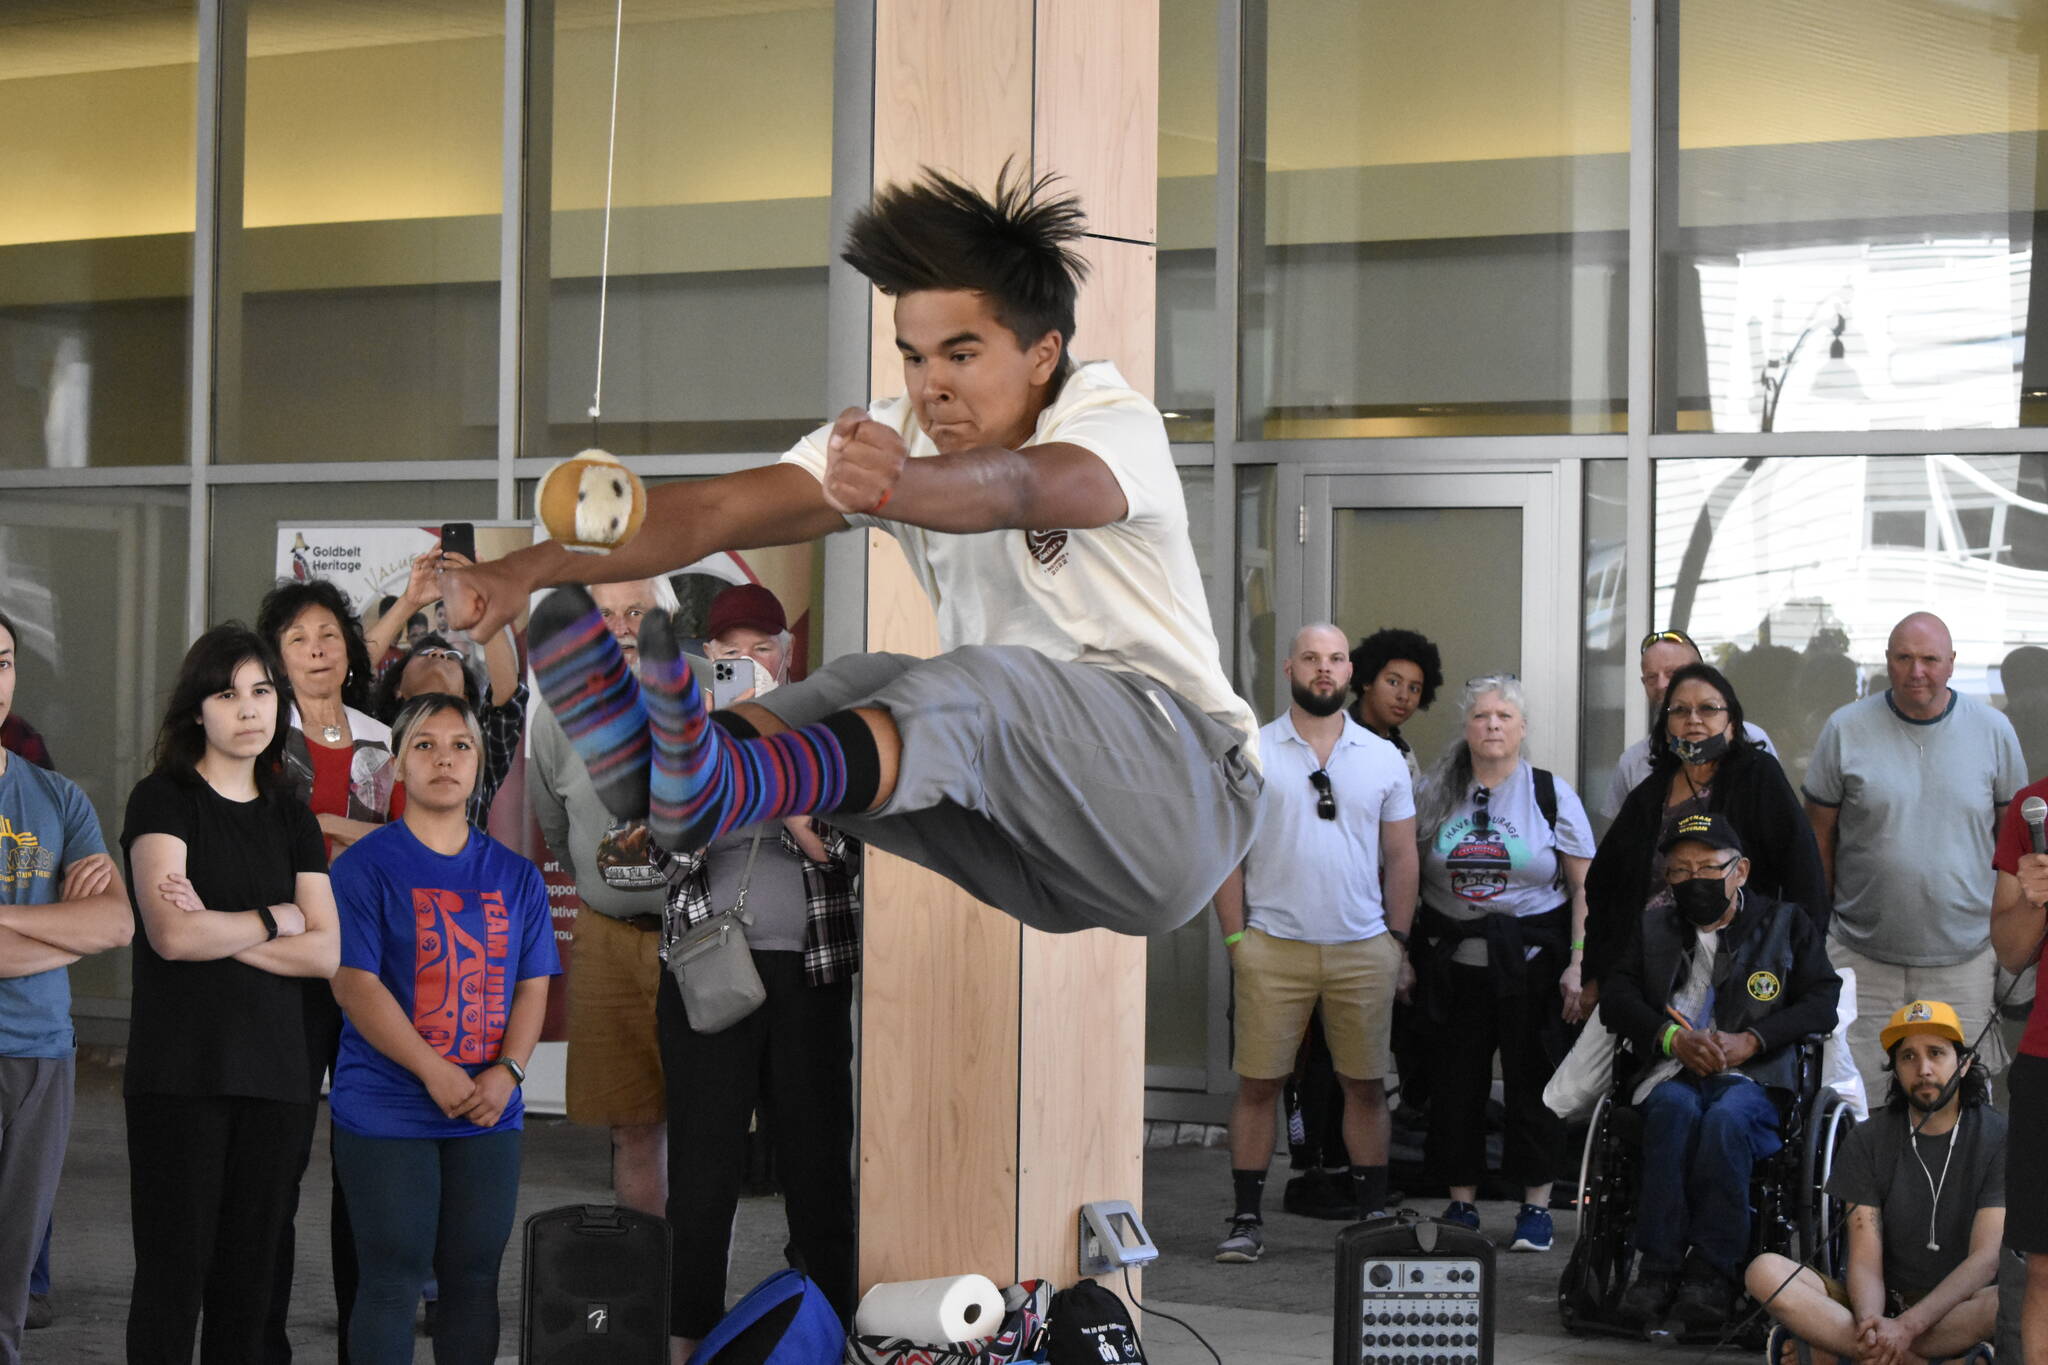 Nathan Blake, 15, does a two-foot high kick during a demonstration of traditional Arctic games at the Sealaska Arts Campus on Thursday, June 8, 2022, part of the Celebration 2022 festivities. (Peter Segall / Juneau Empire)